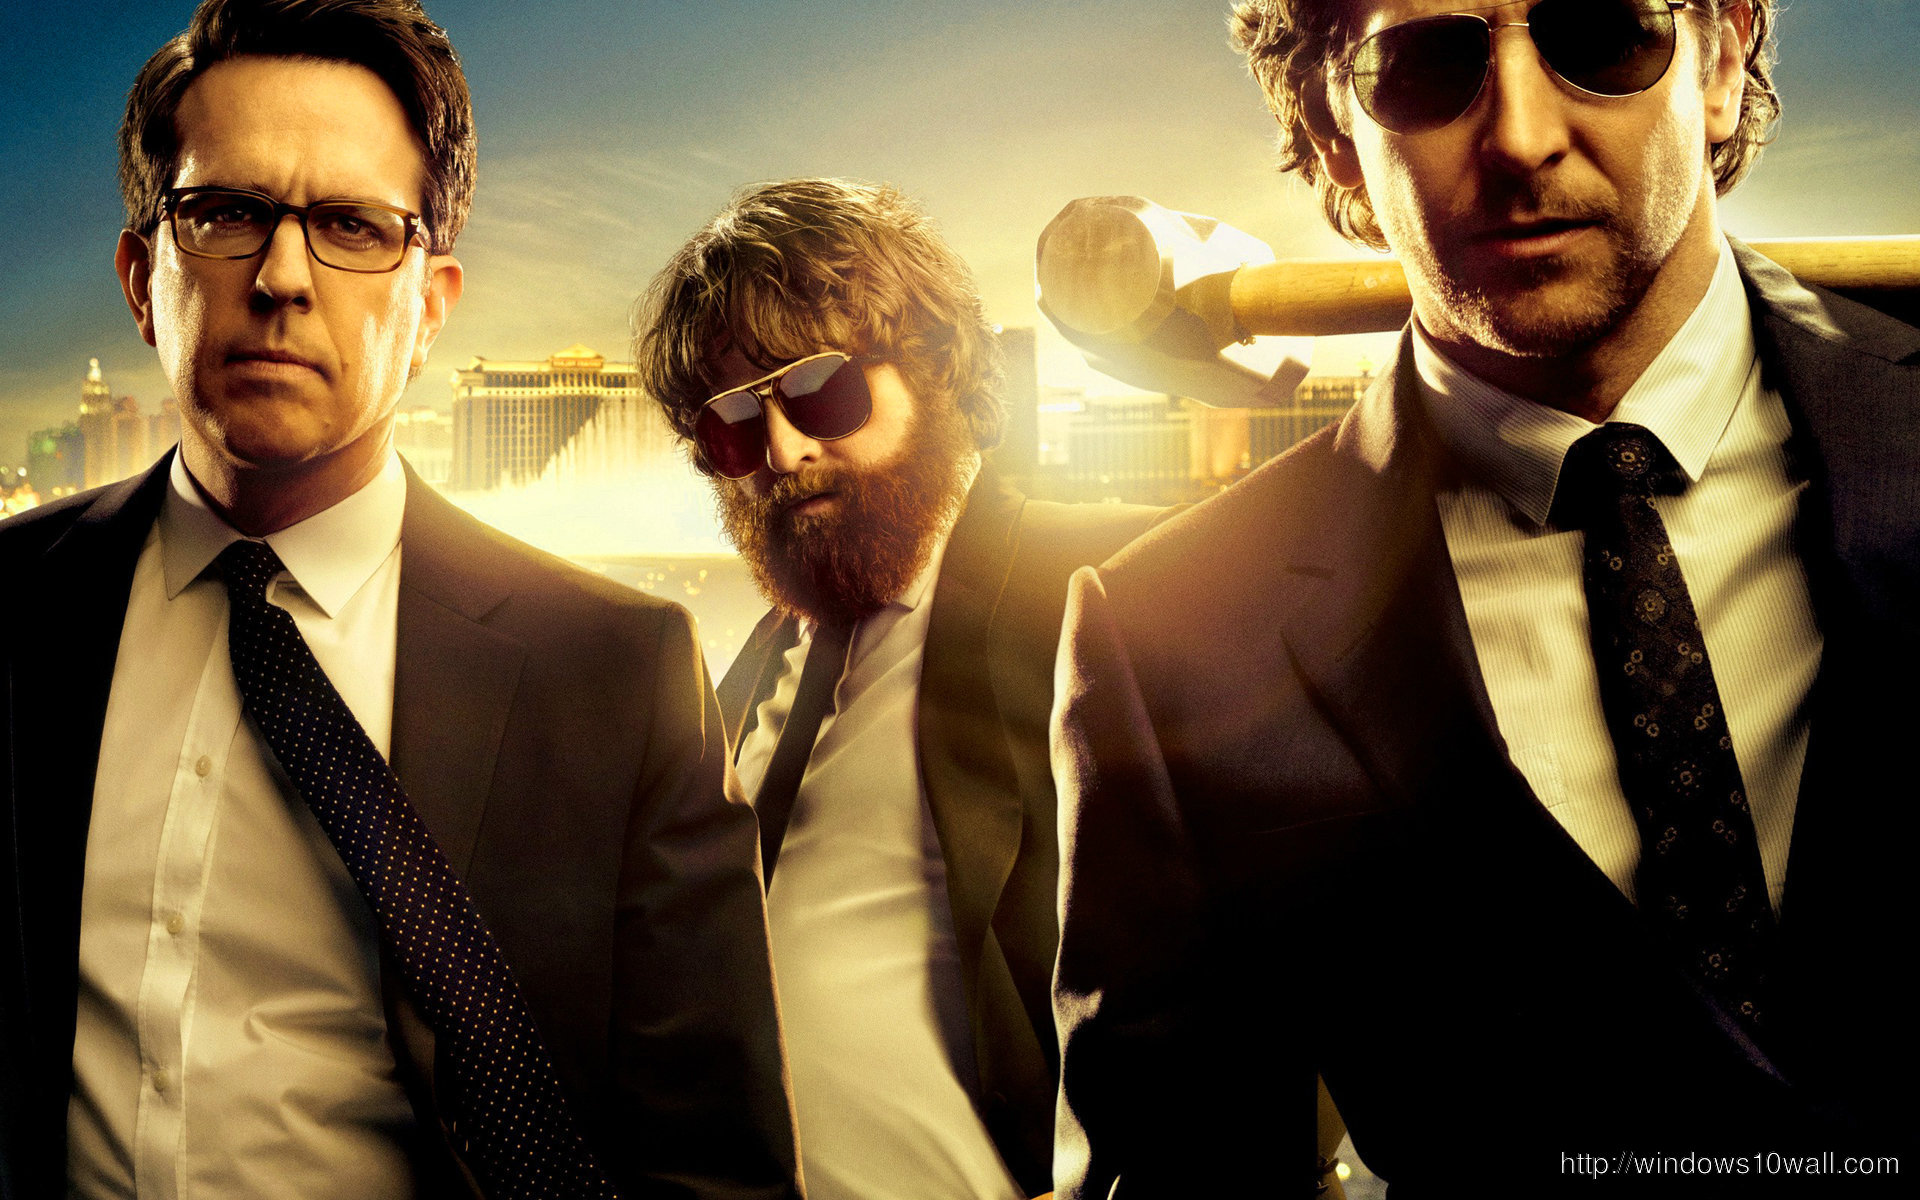 the-wolf-pack-wearing-suits--the-hangover-ideas-background-wallpaper